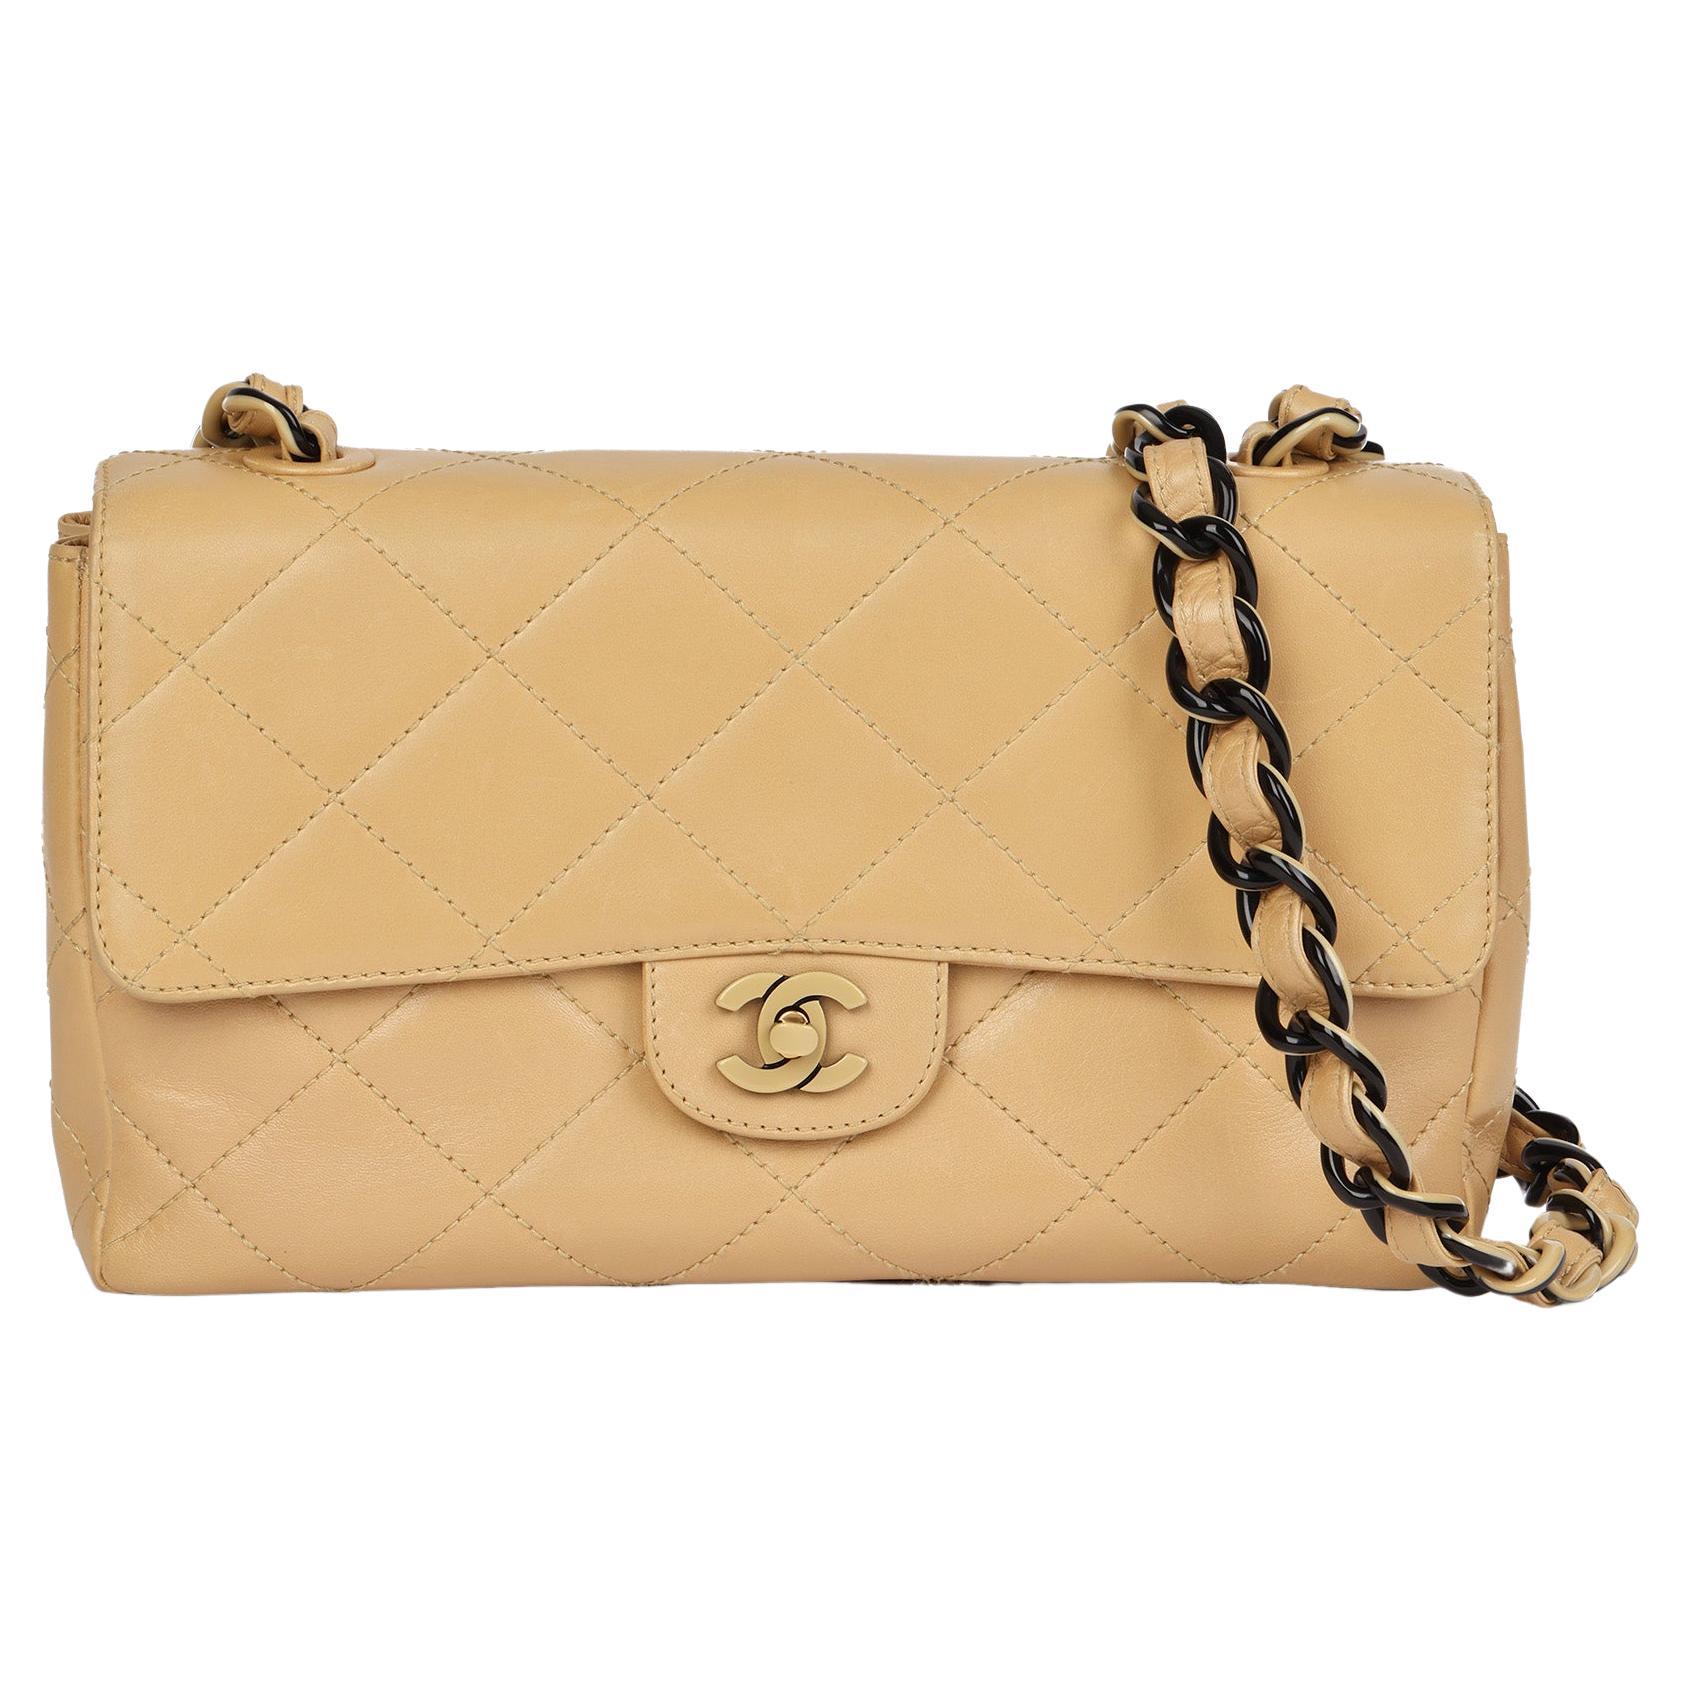 CHANEL Beige Quilted Lambskin Vintage Medium Classic Single Flap Bag